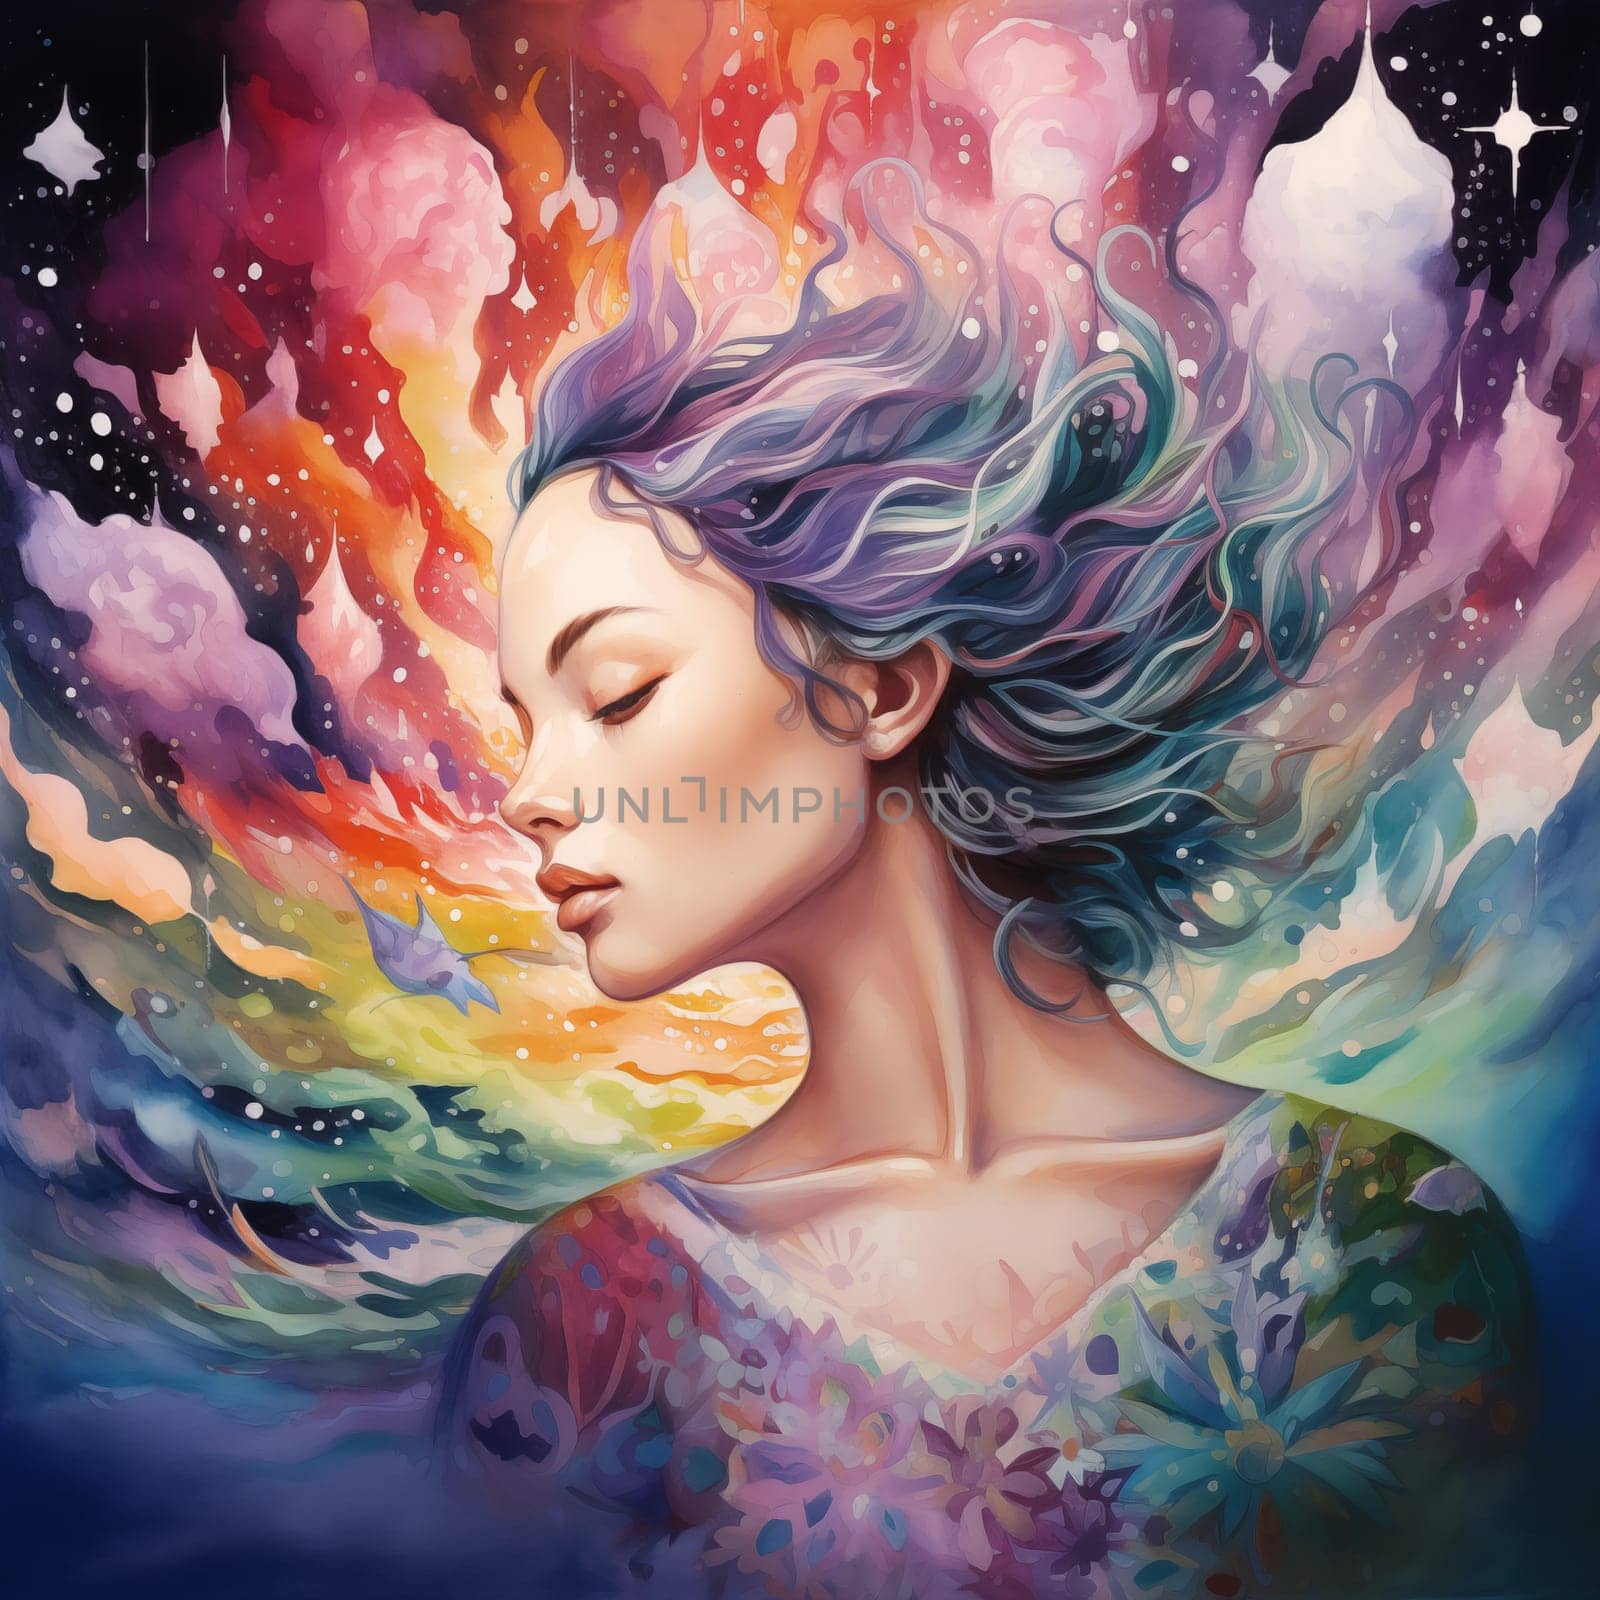 In close-up, a girl meditates with closed eyes and flowing hair against a cosmic backdrop with nebulae and swirls of energy. A serene scene capturing the beauty of meditation amidst cosmic wonders.